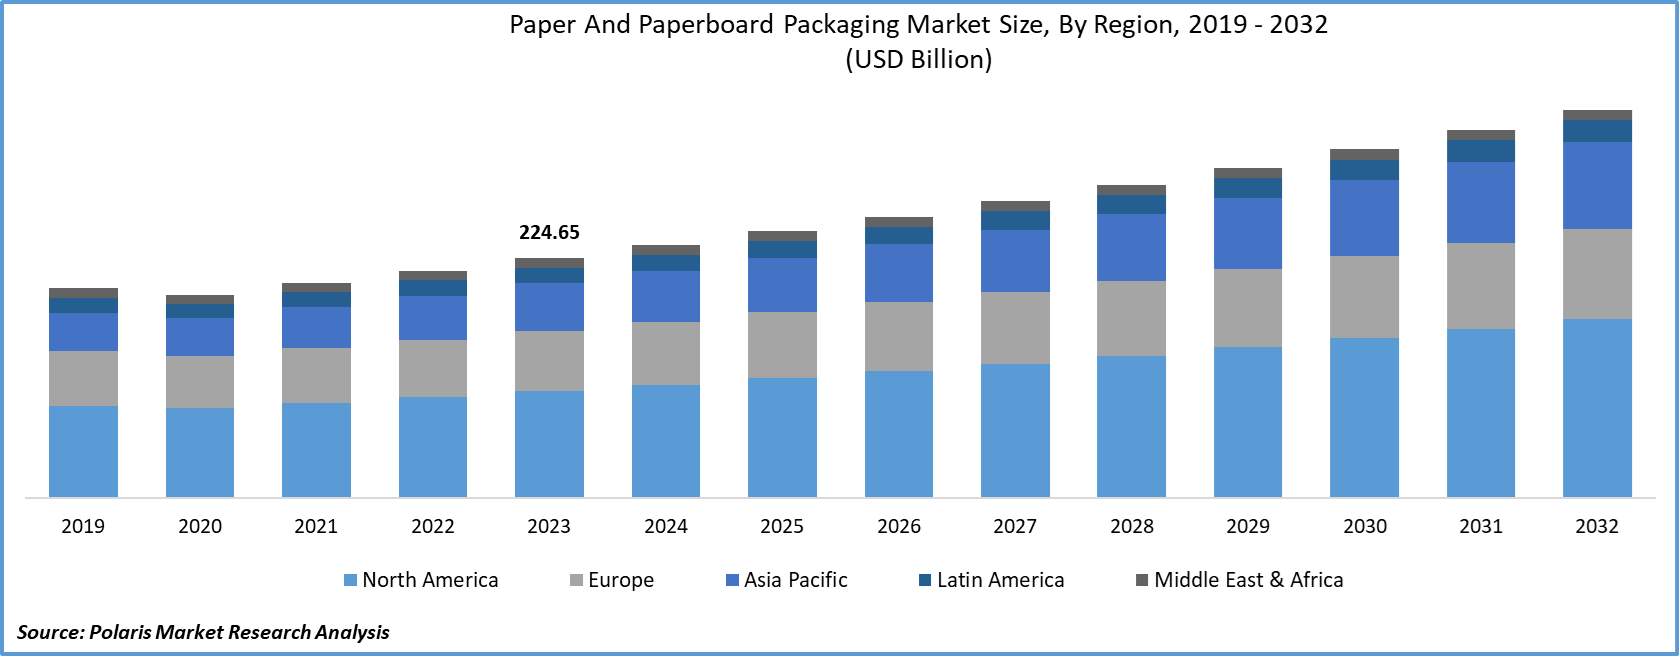 Paper and Paperboard Packaging Market Size